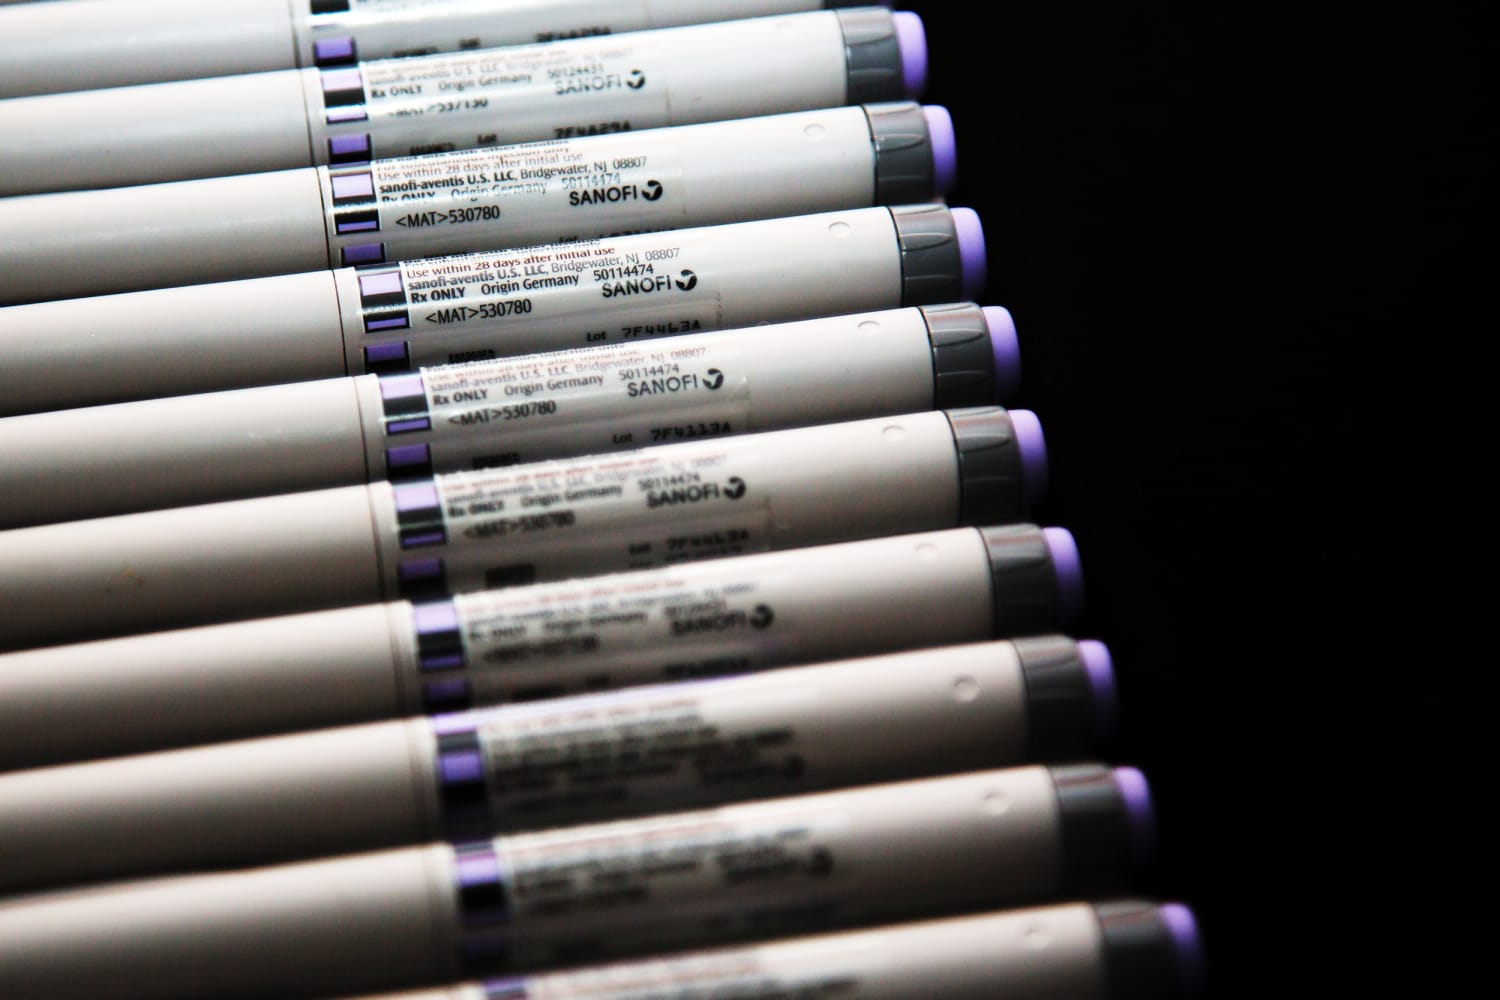 Why is insulin still so expensive for diabetes patients in the U.S.?